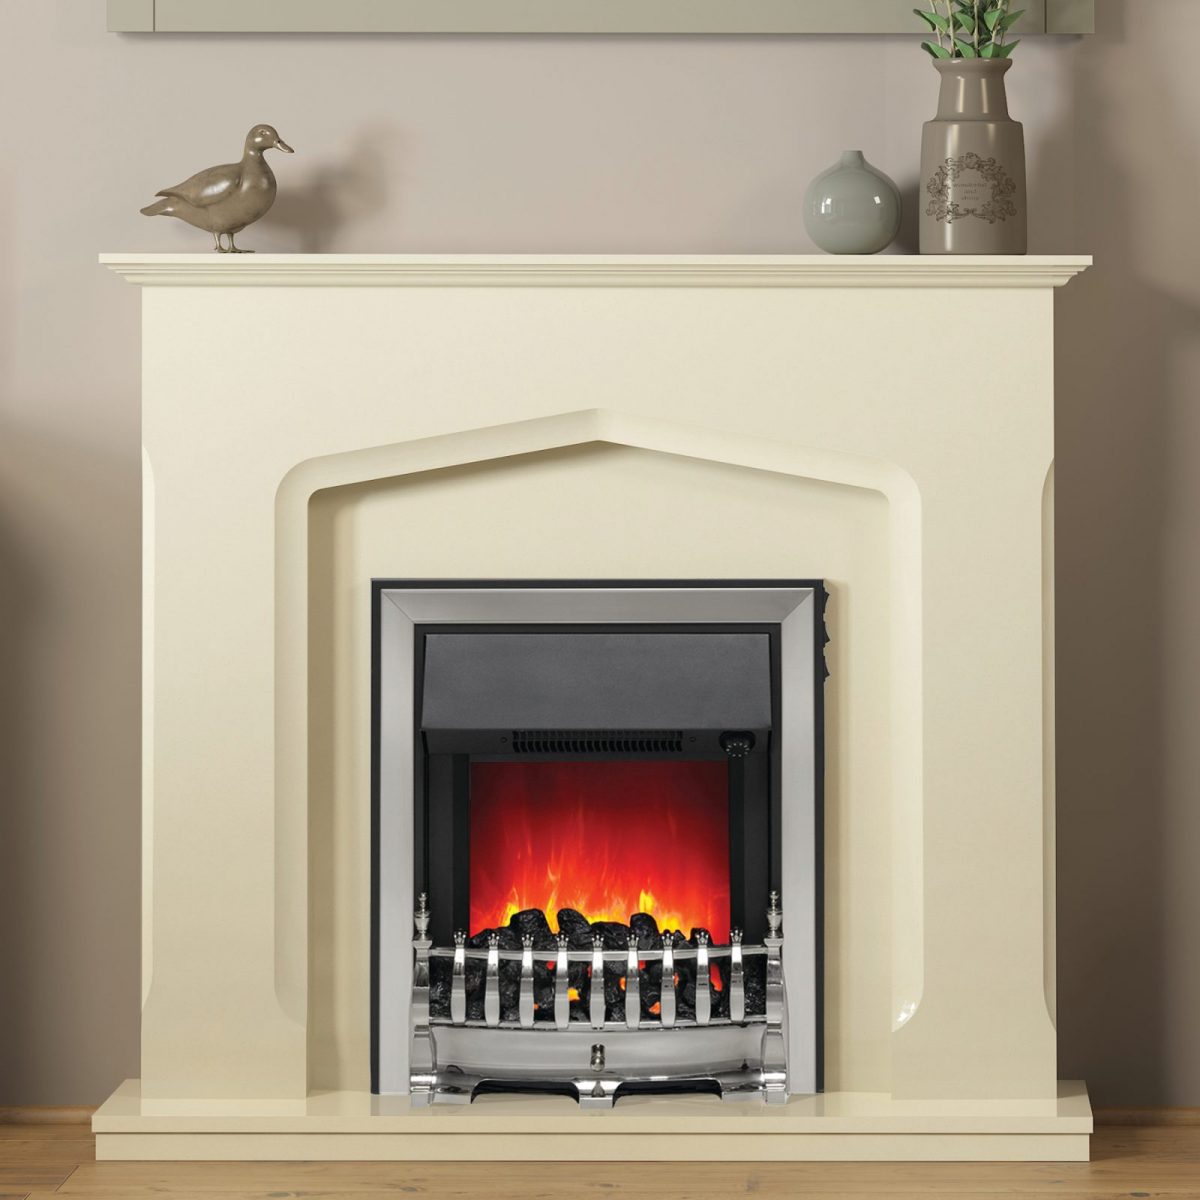 45″ Bramwell fireplace in Marfil marble effect with Electric Chrome Finish Fire